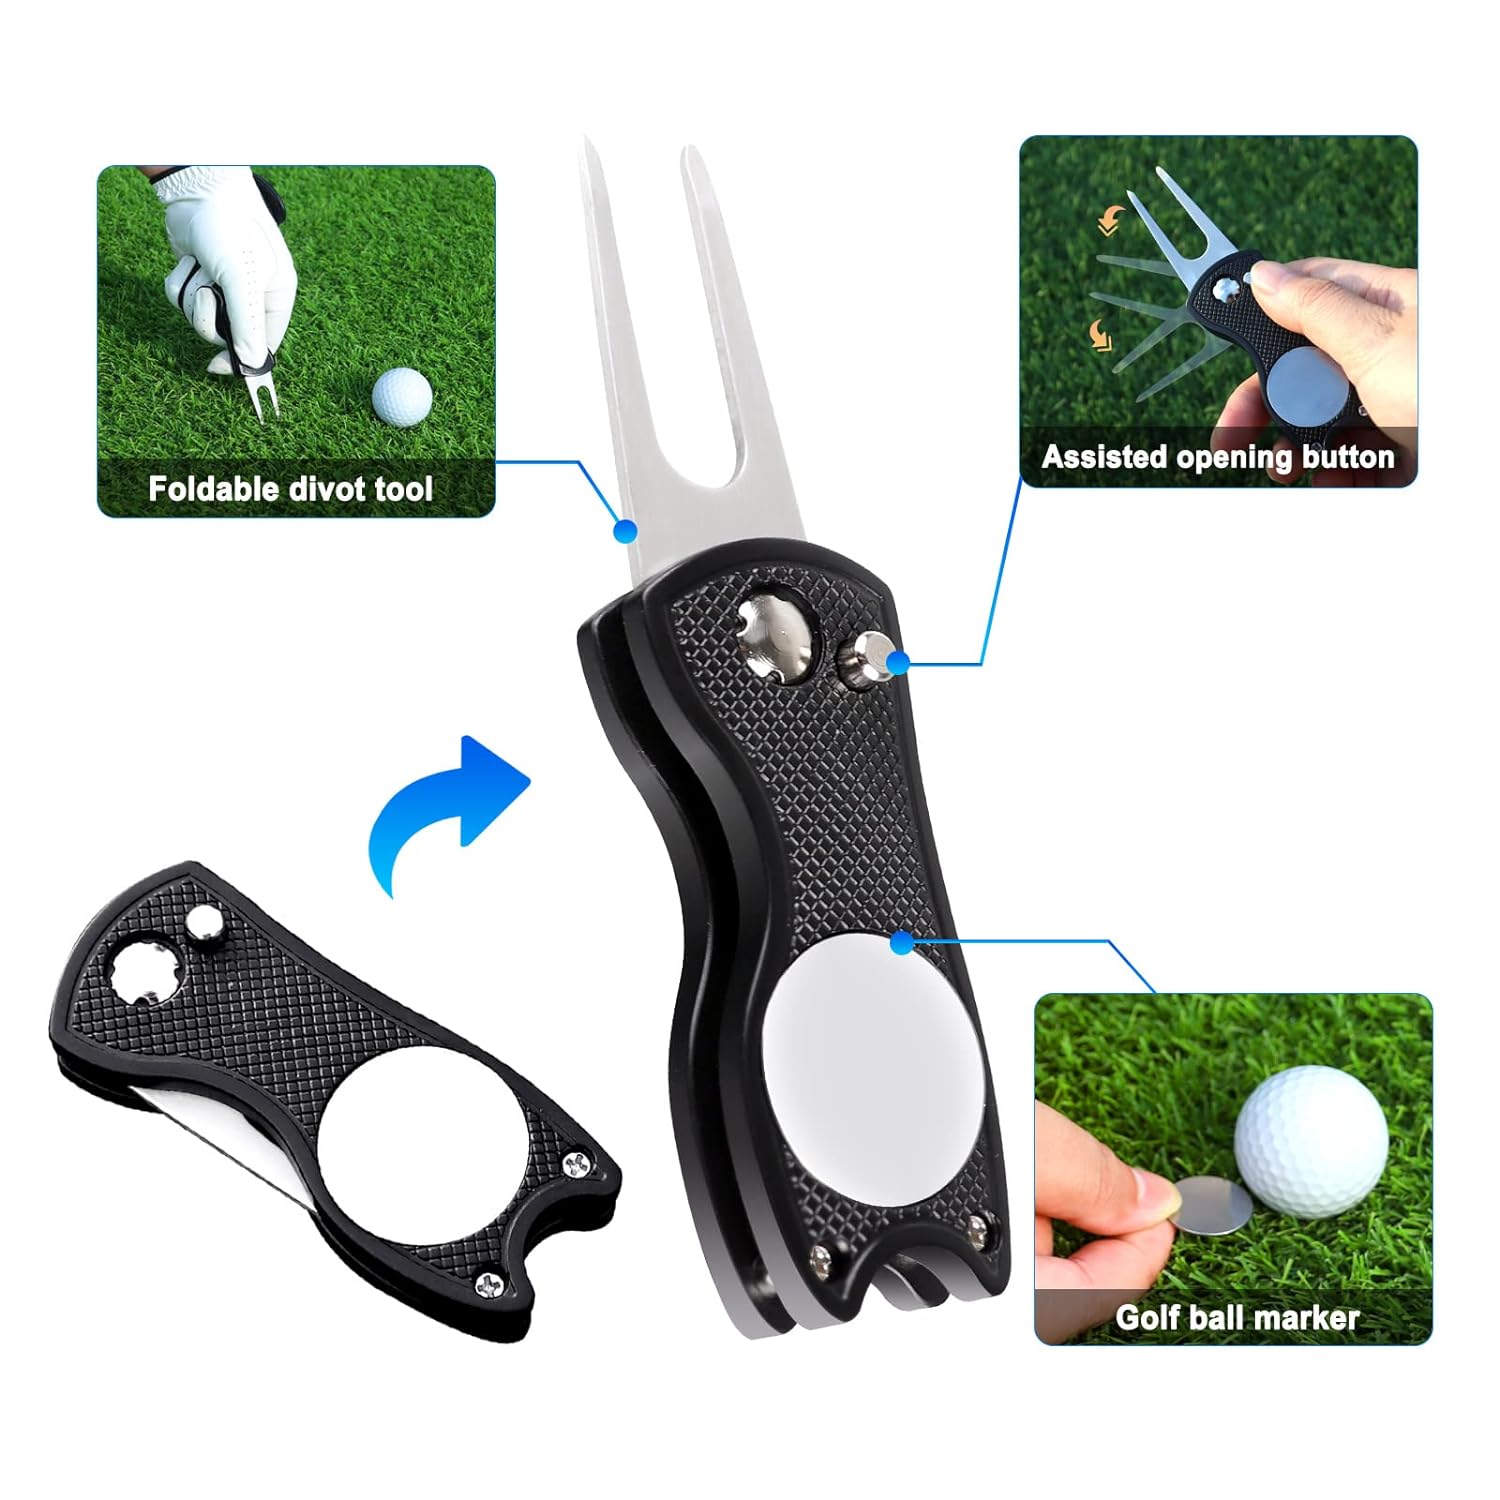 Big Crazy Golf Towel Microfiber Waffle Pattern, Retractable Golf Club Brush Groove Cleaner, Golf Divot Tool with Magnetic Ball Marker, Golf Towels for Golf Bags for Men Black